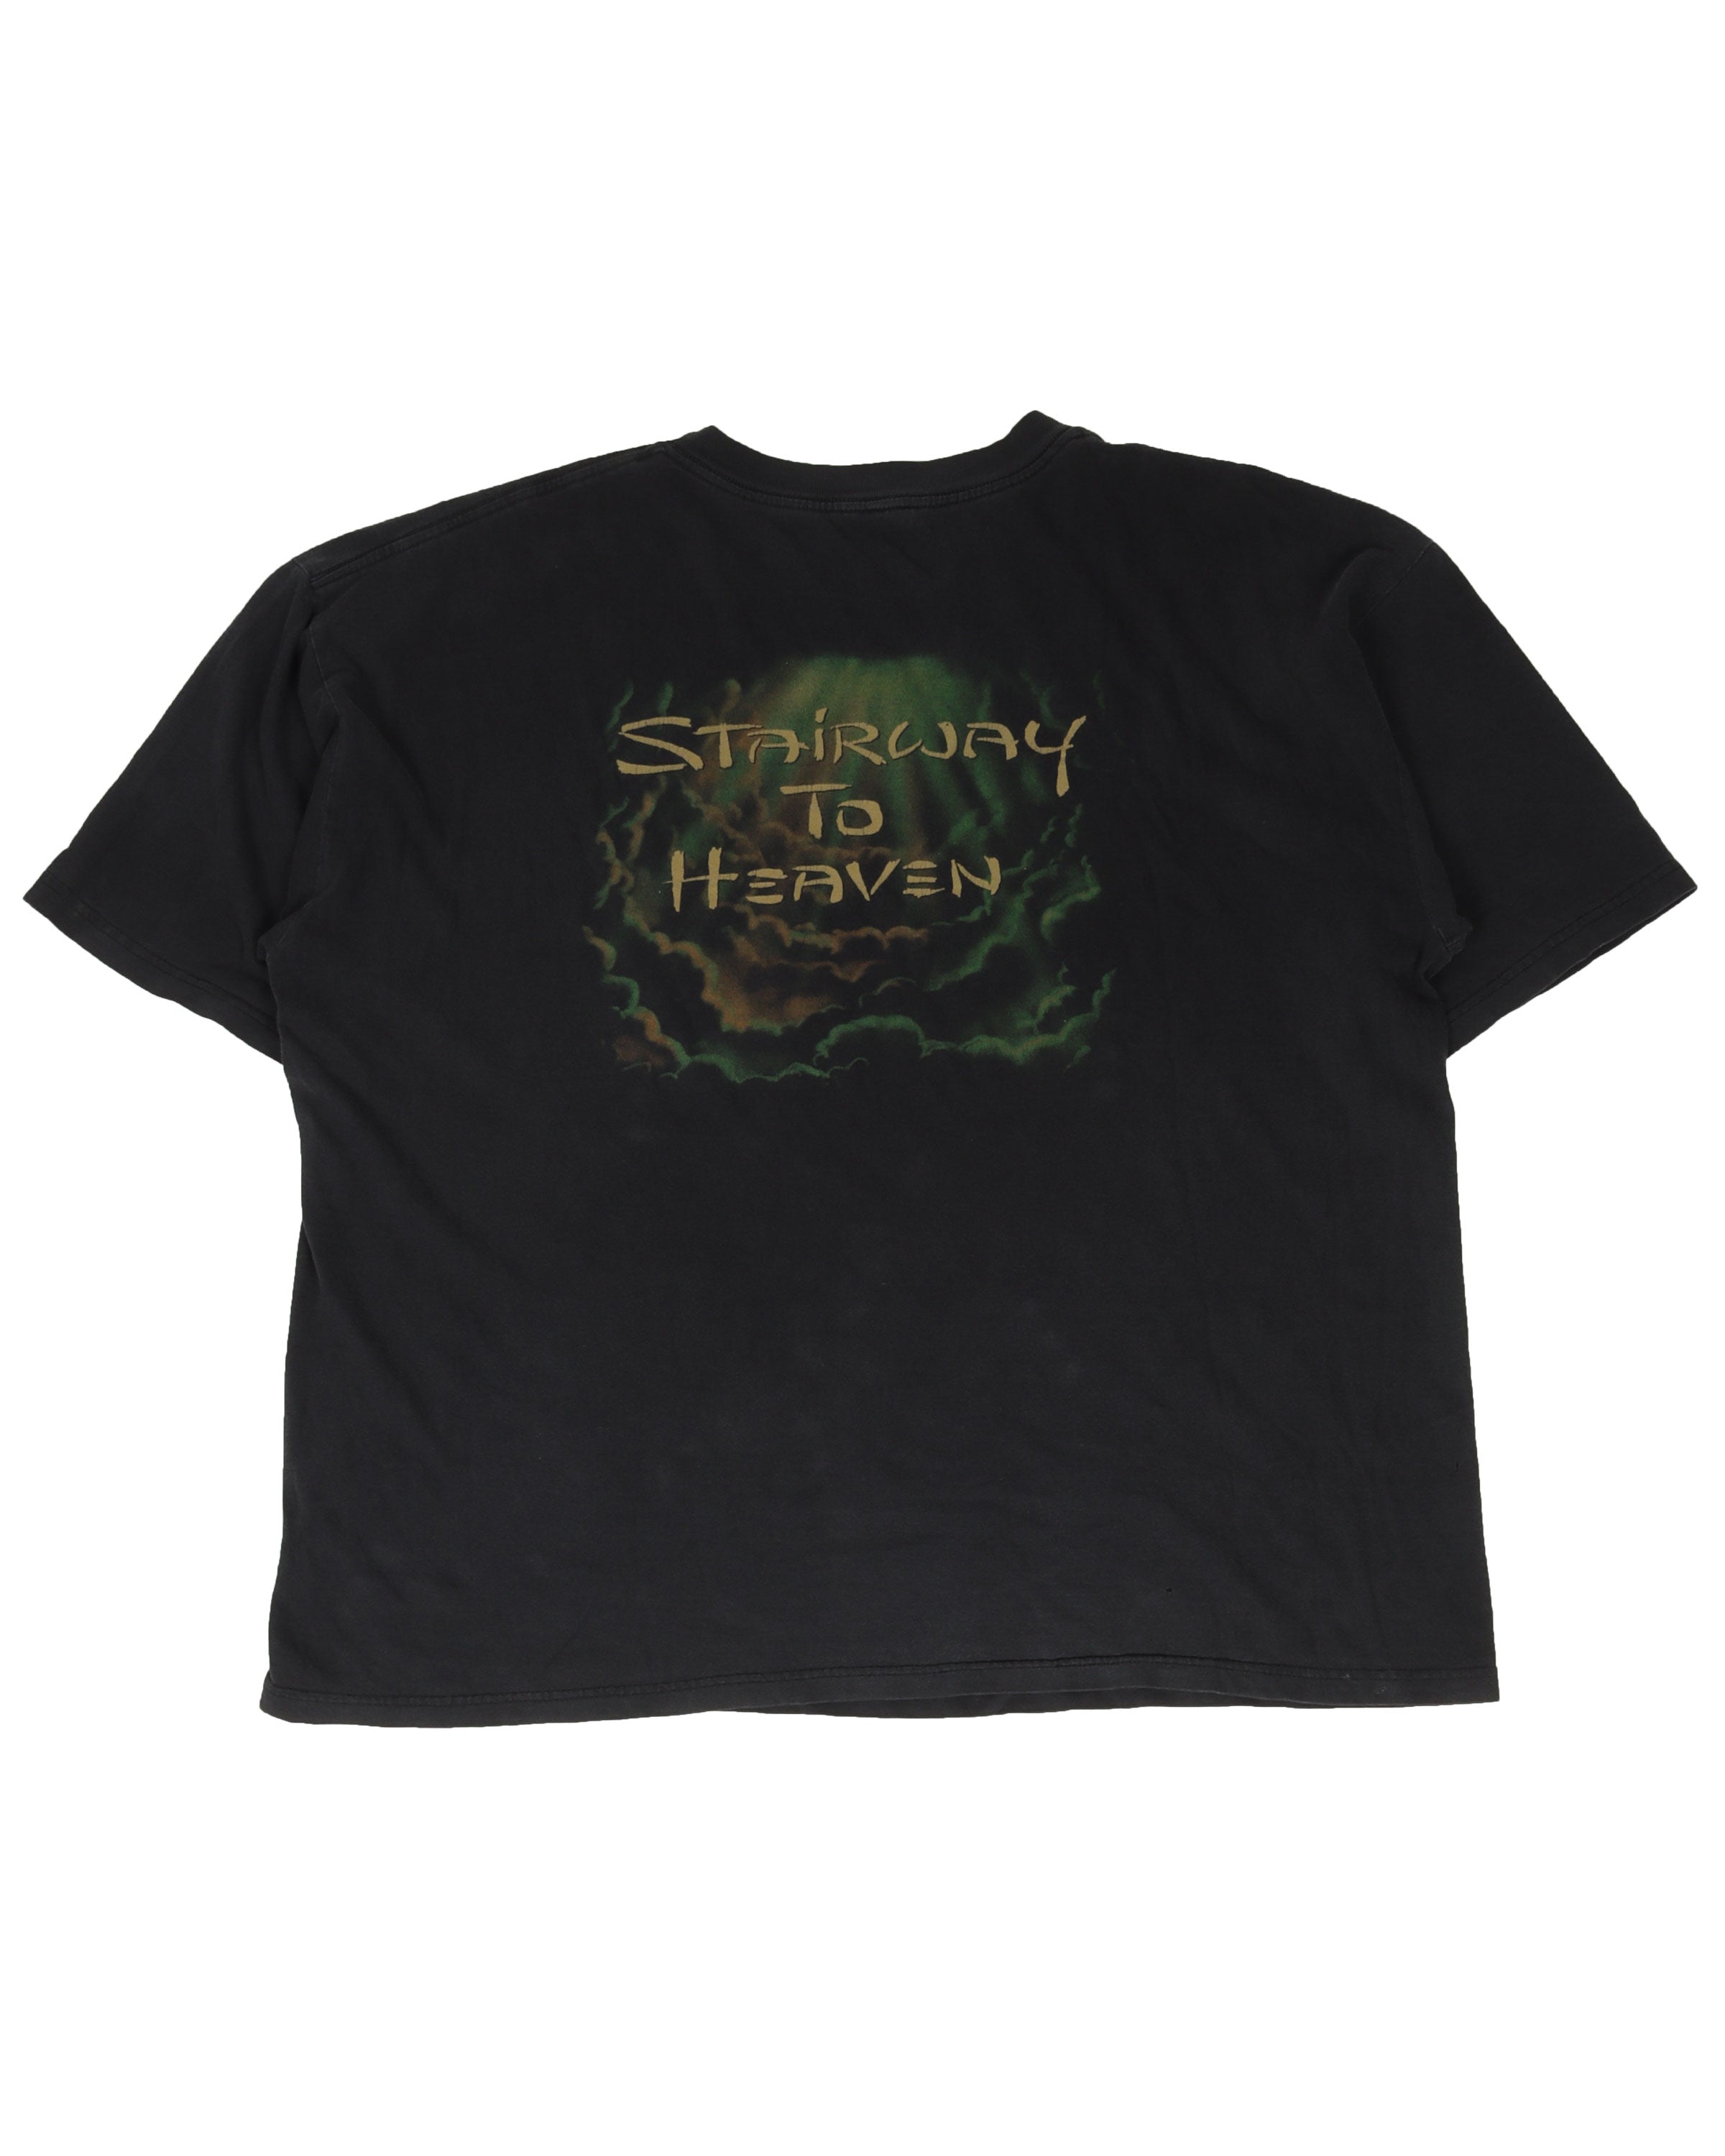 Led Zeppelin "Stair Way To Heaven" T-Shirt